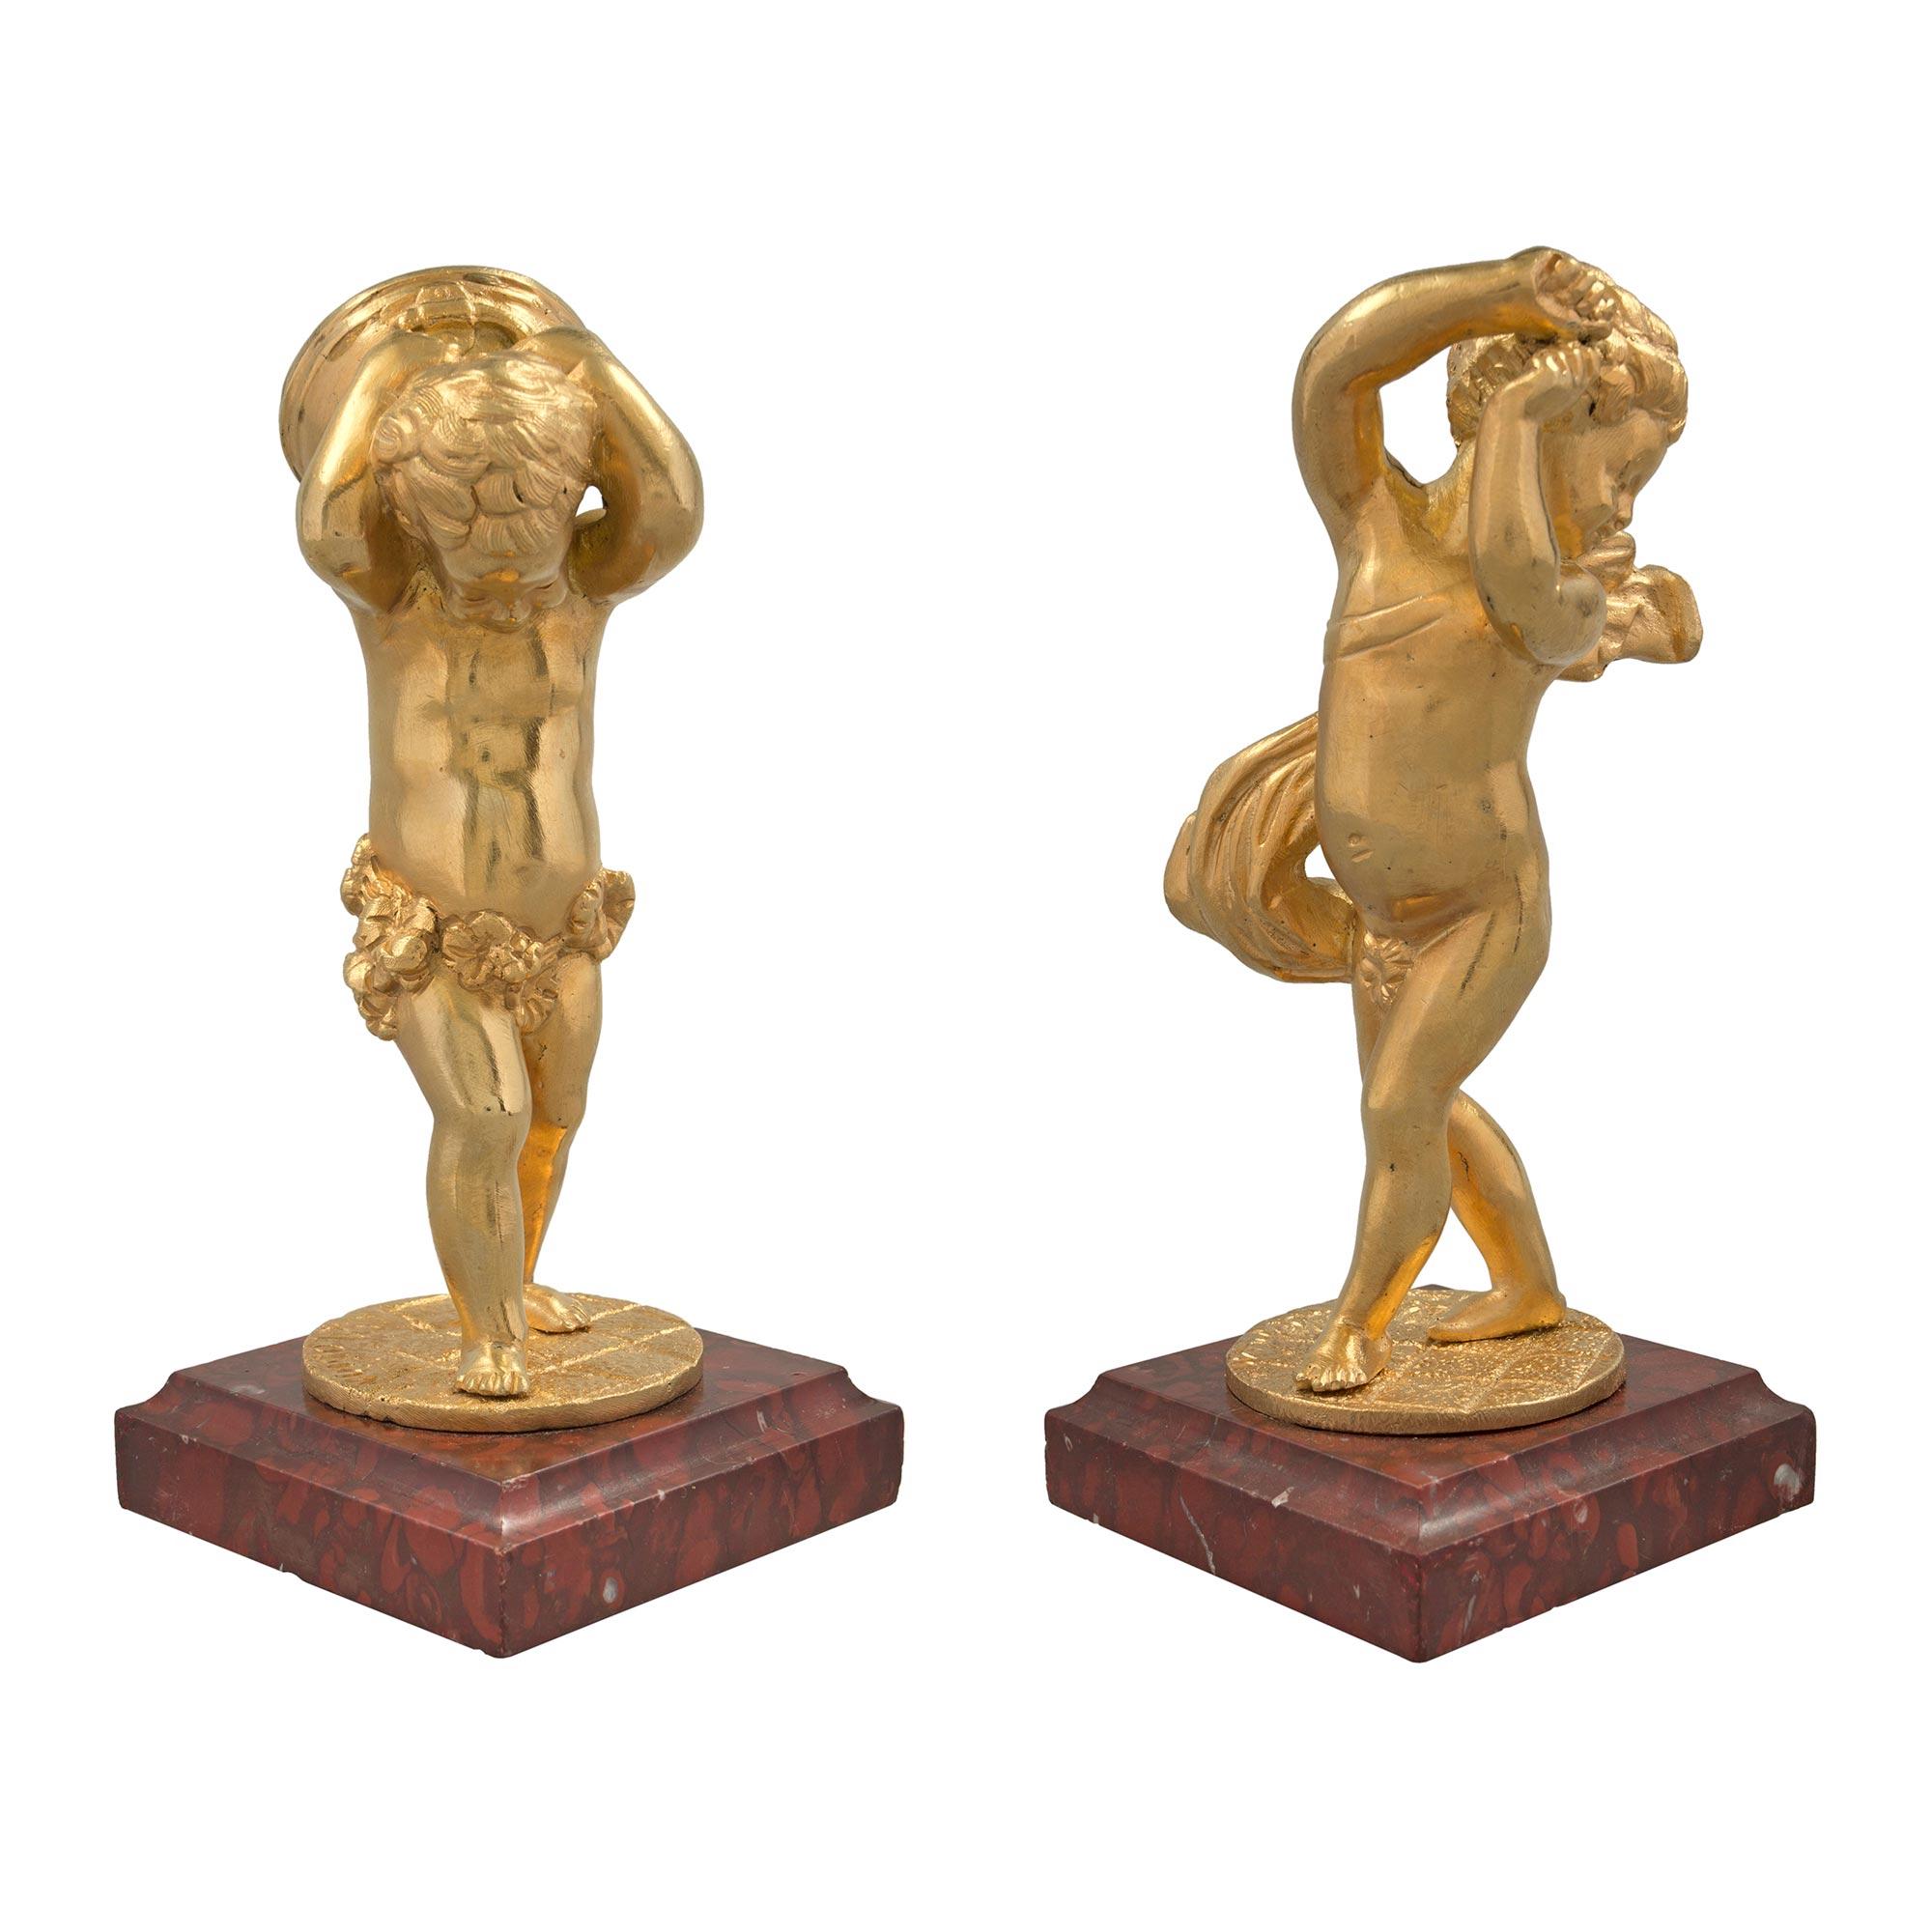 A charming pair of French 19th century Louis XVI st. ormolu cherub signed statues. The pair are raised by ormolu bun feet below a square Rouge Griotte marble base with mottled border. Above are the sweet ormolu cherubs, one lifting a drum behind his